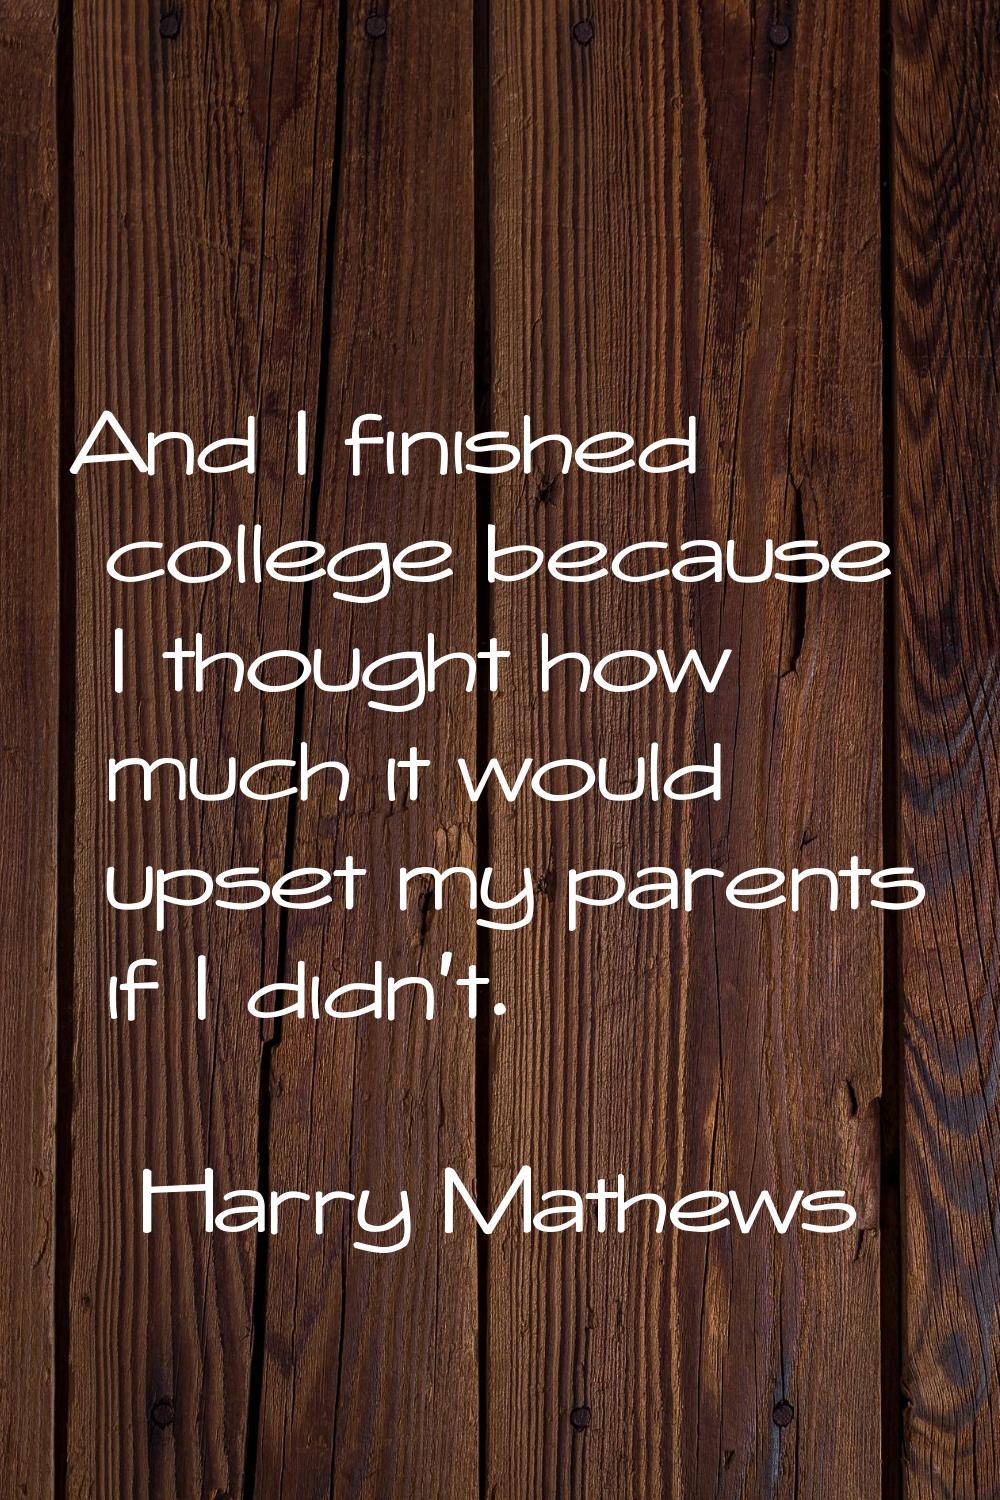 And I finished college because I thought how much it would upset my parents if I didn't.